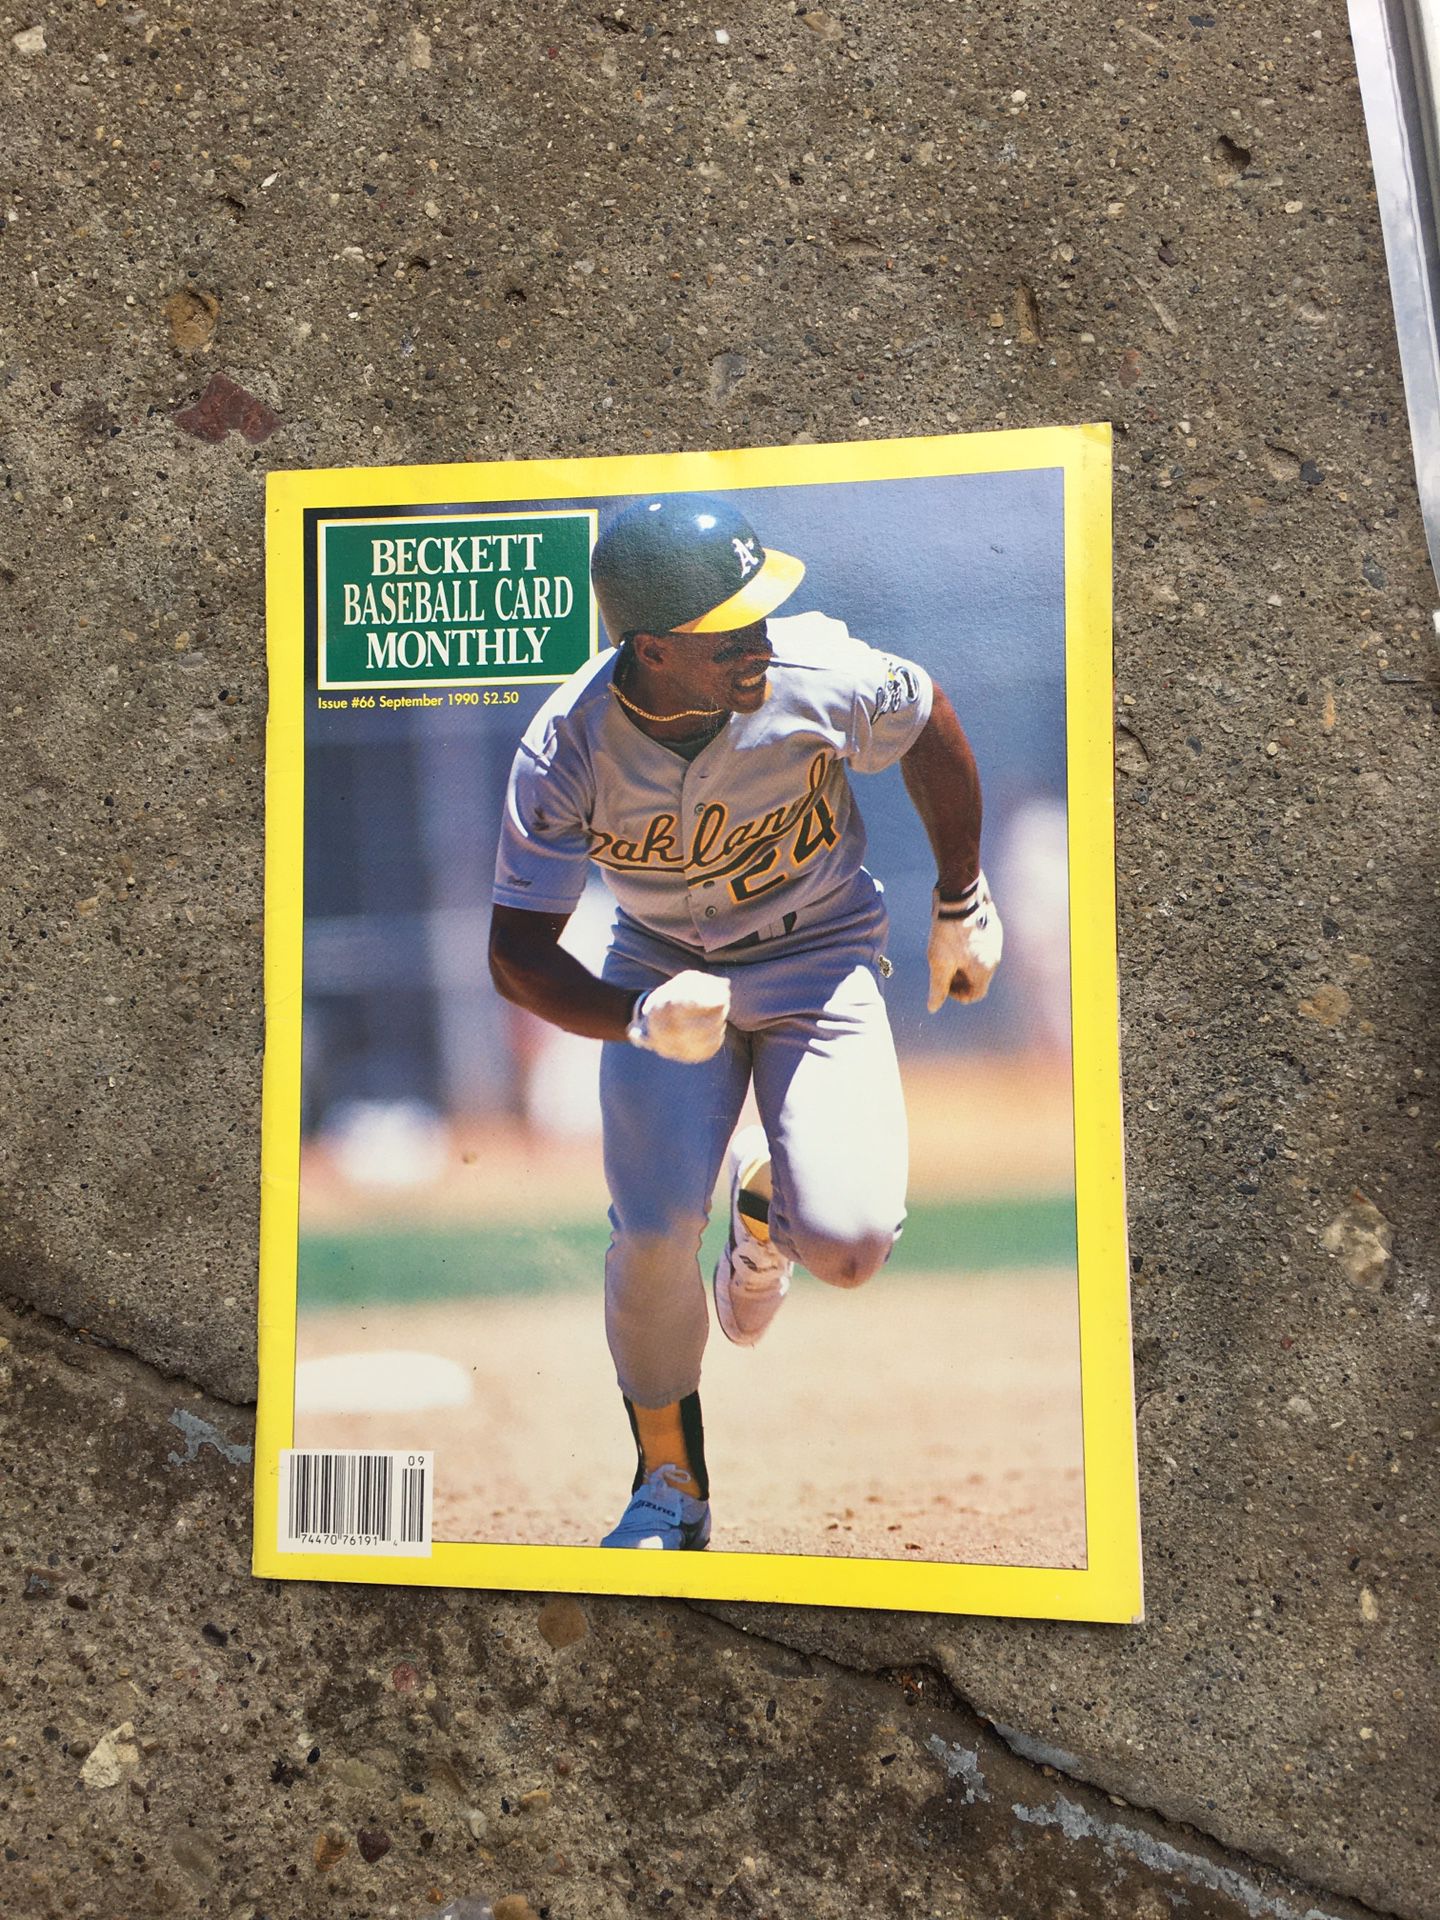 Sept. 1990 Beckett Baseball Card Monthly See My Site Over 650 Sports Collectibles For Sale